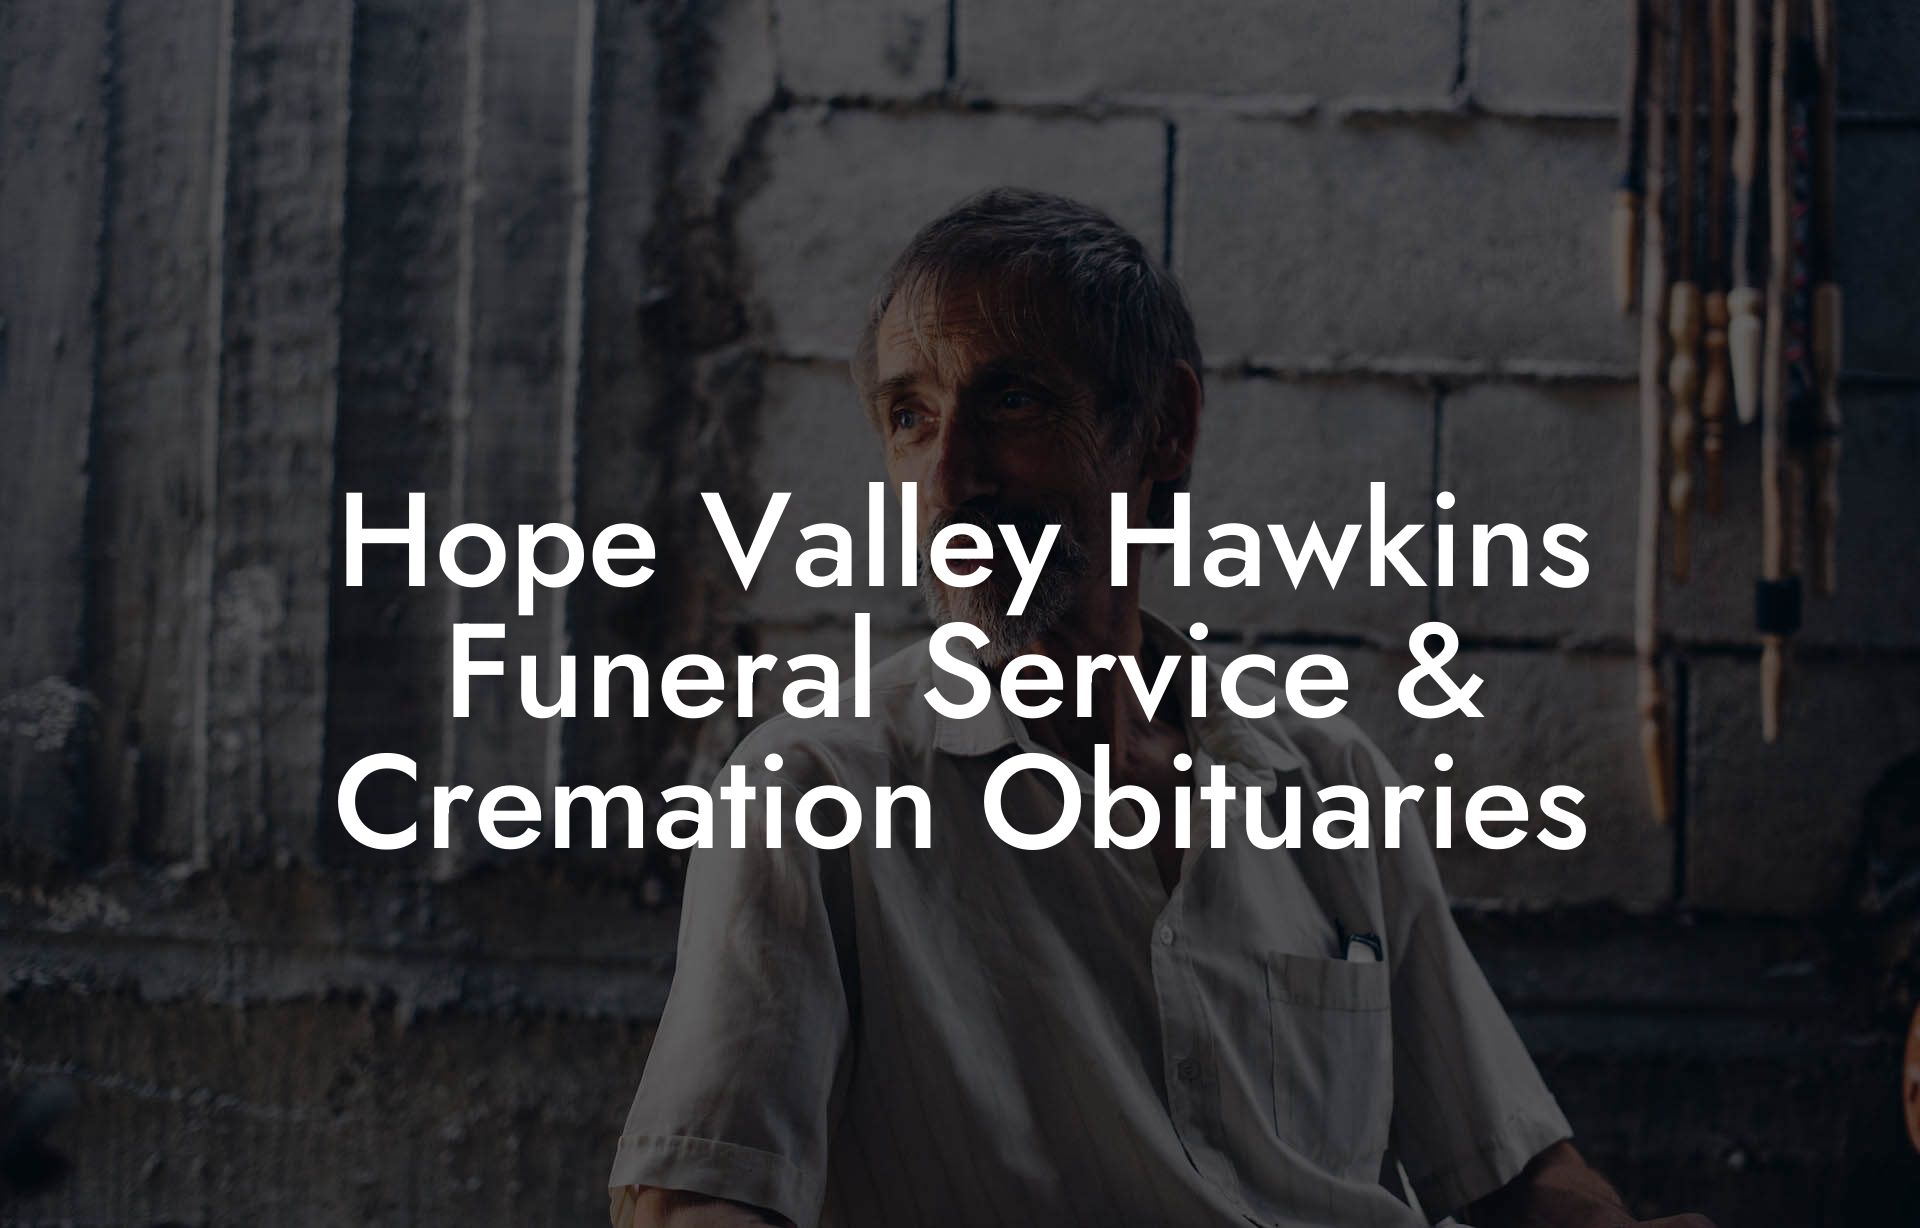 Hope Valley Hawkins Funeral Service & Cremation Obituaries